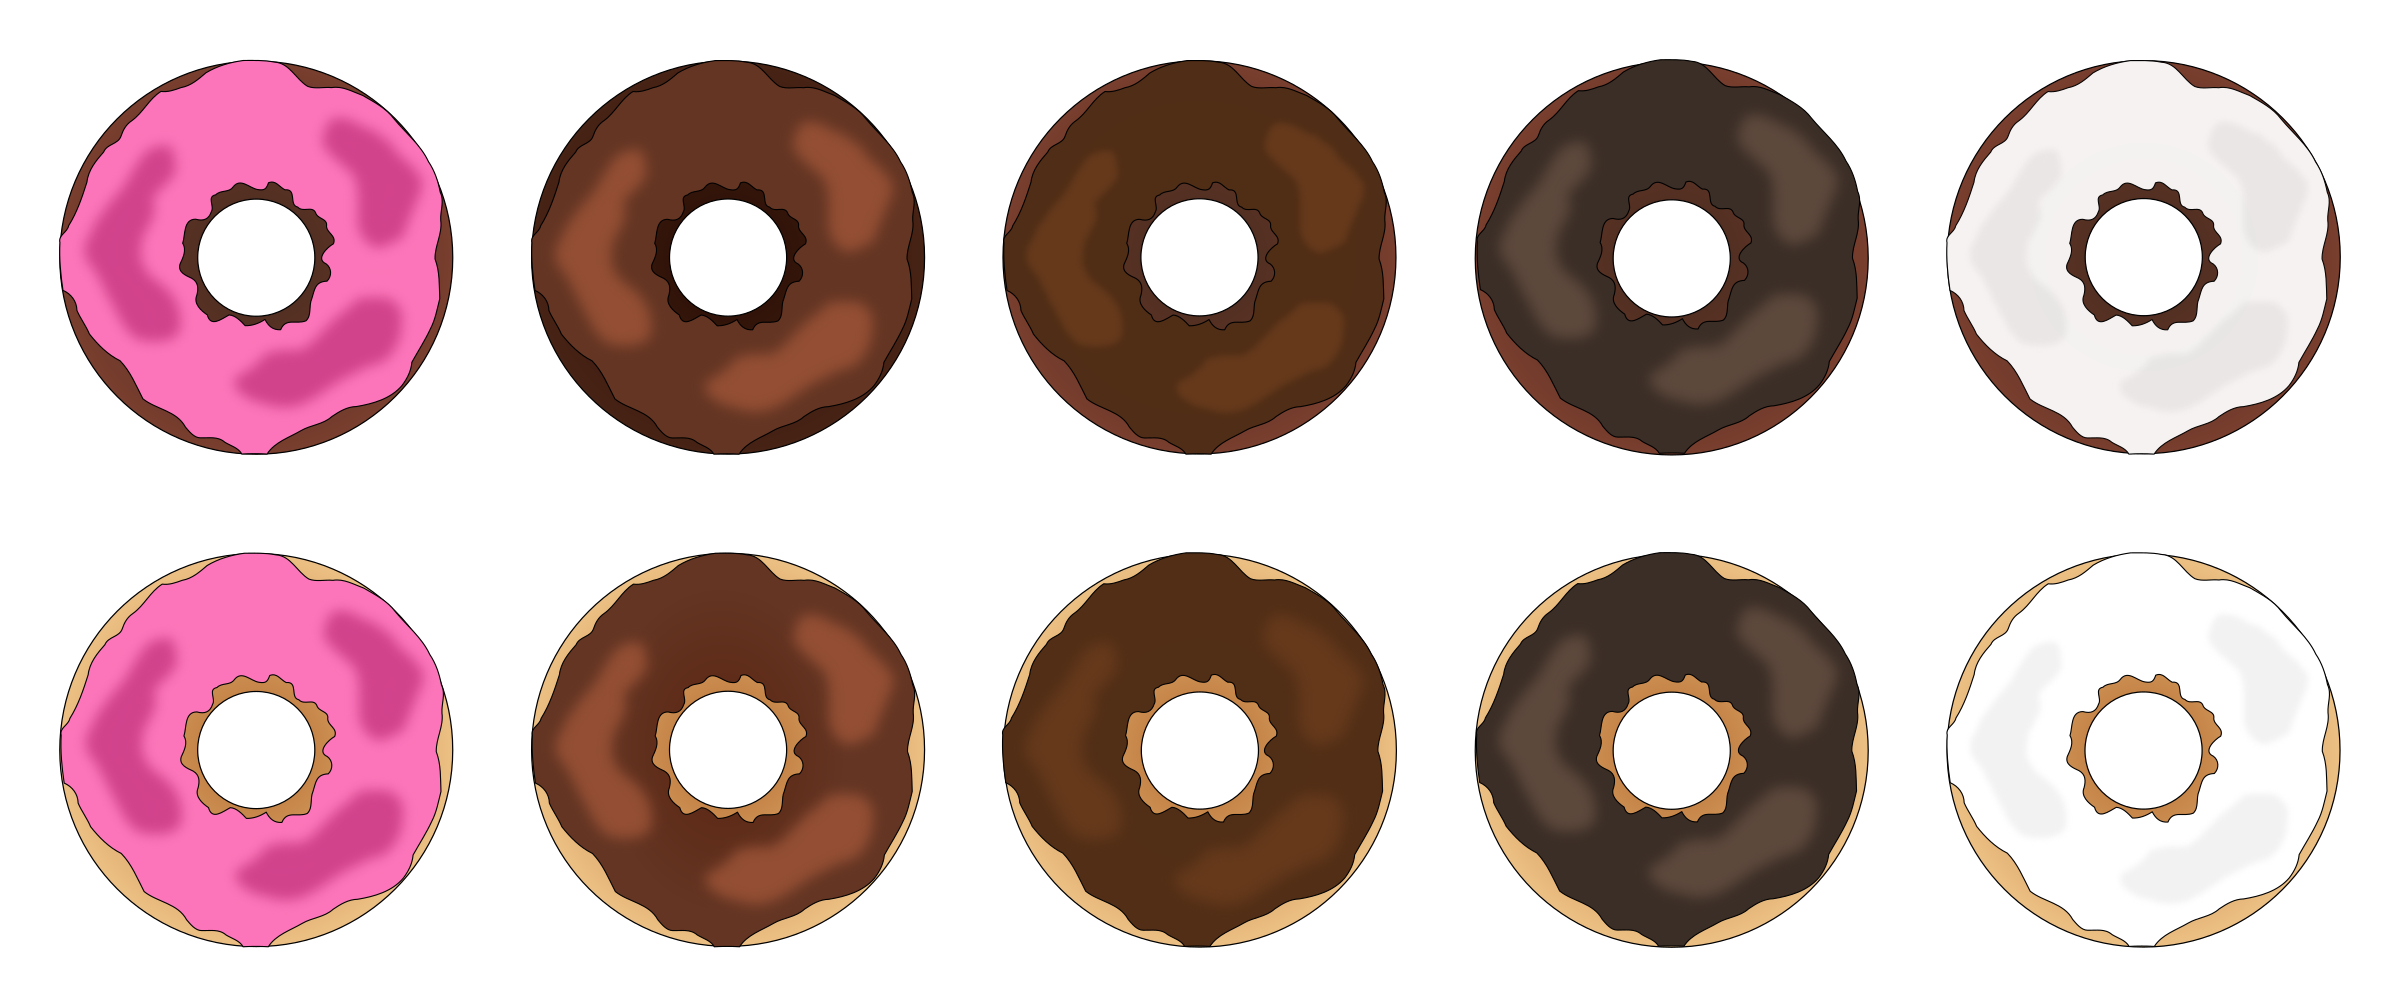 Assorted Plain Frosted Donuts SVG Clip arts